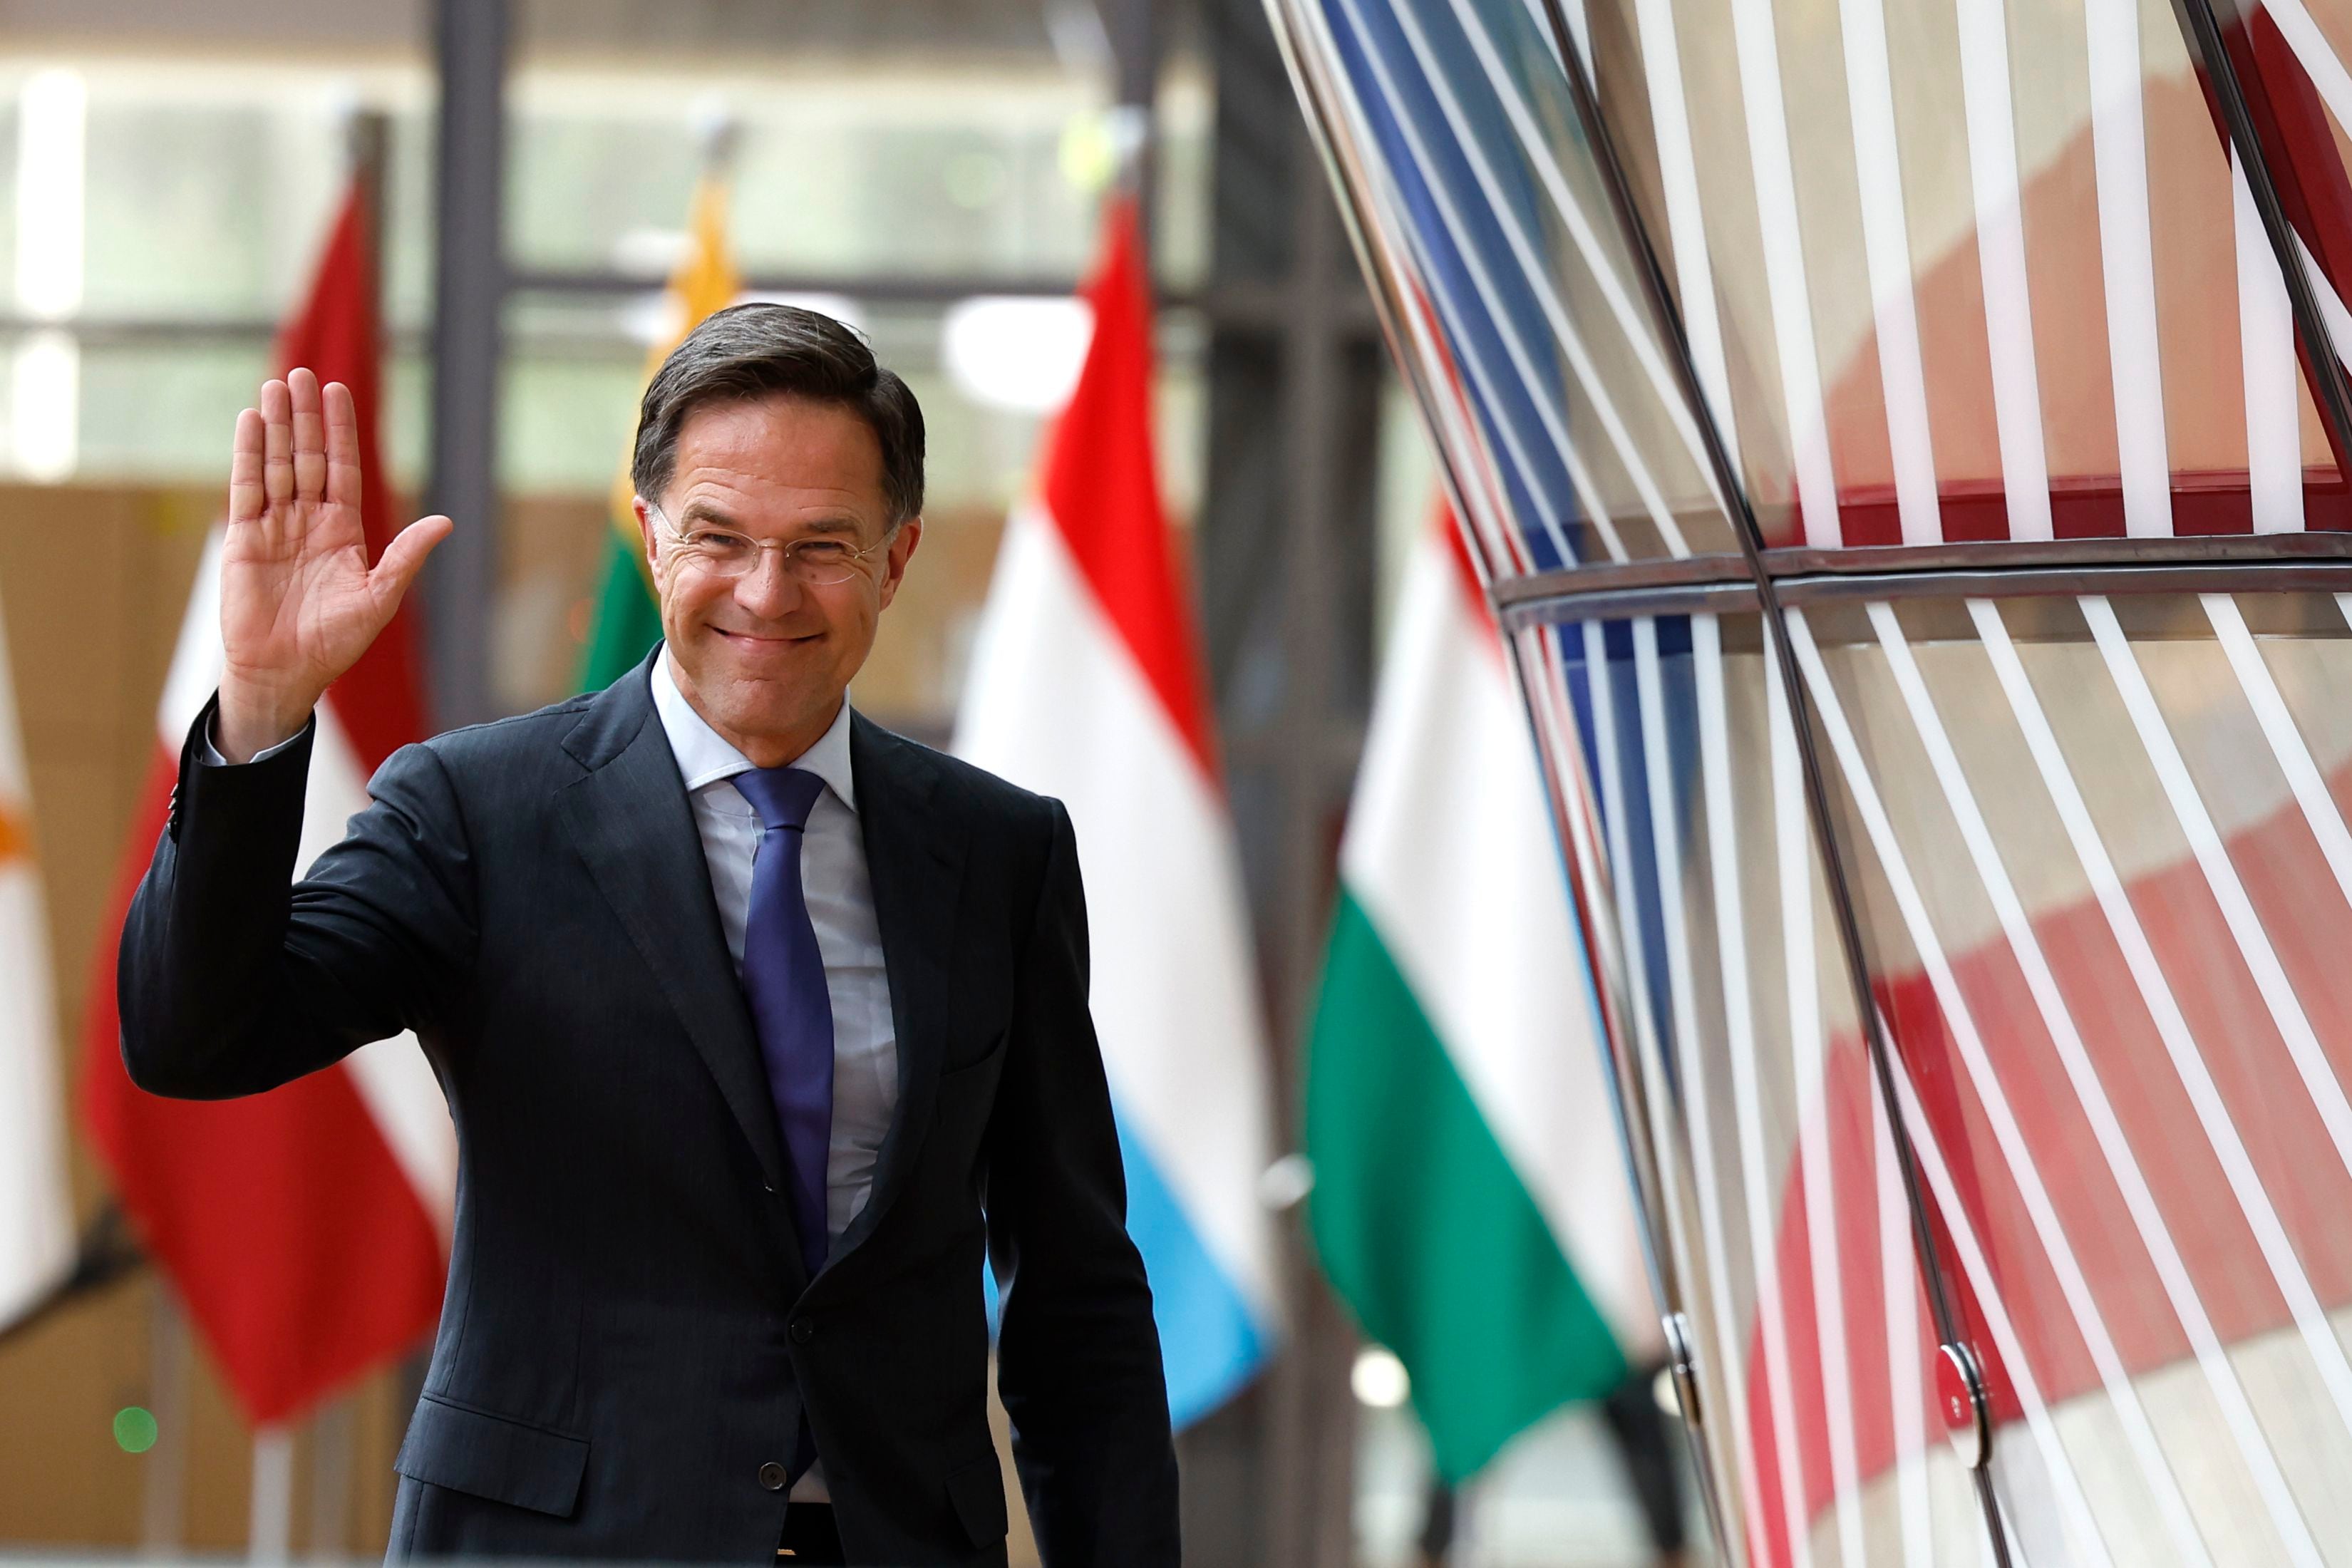 Dutch Prime Minister Mark Rutte urged support for Ukraine, EU and NATO in his farewell speech thumbnail